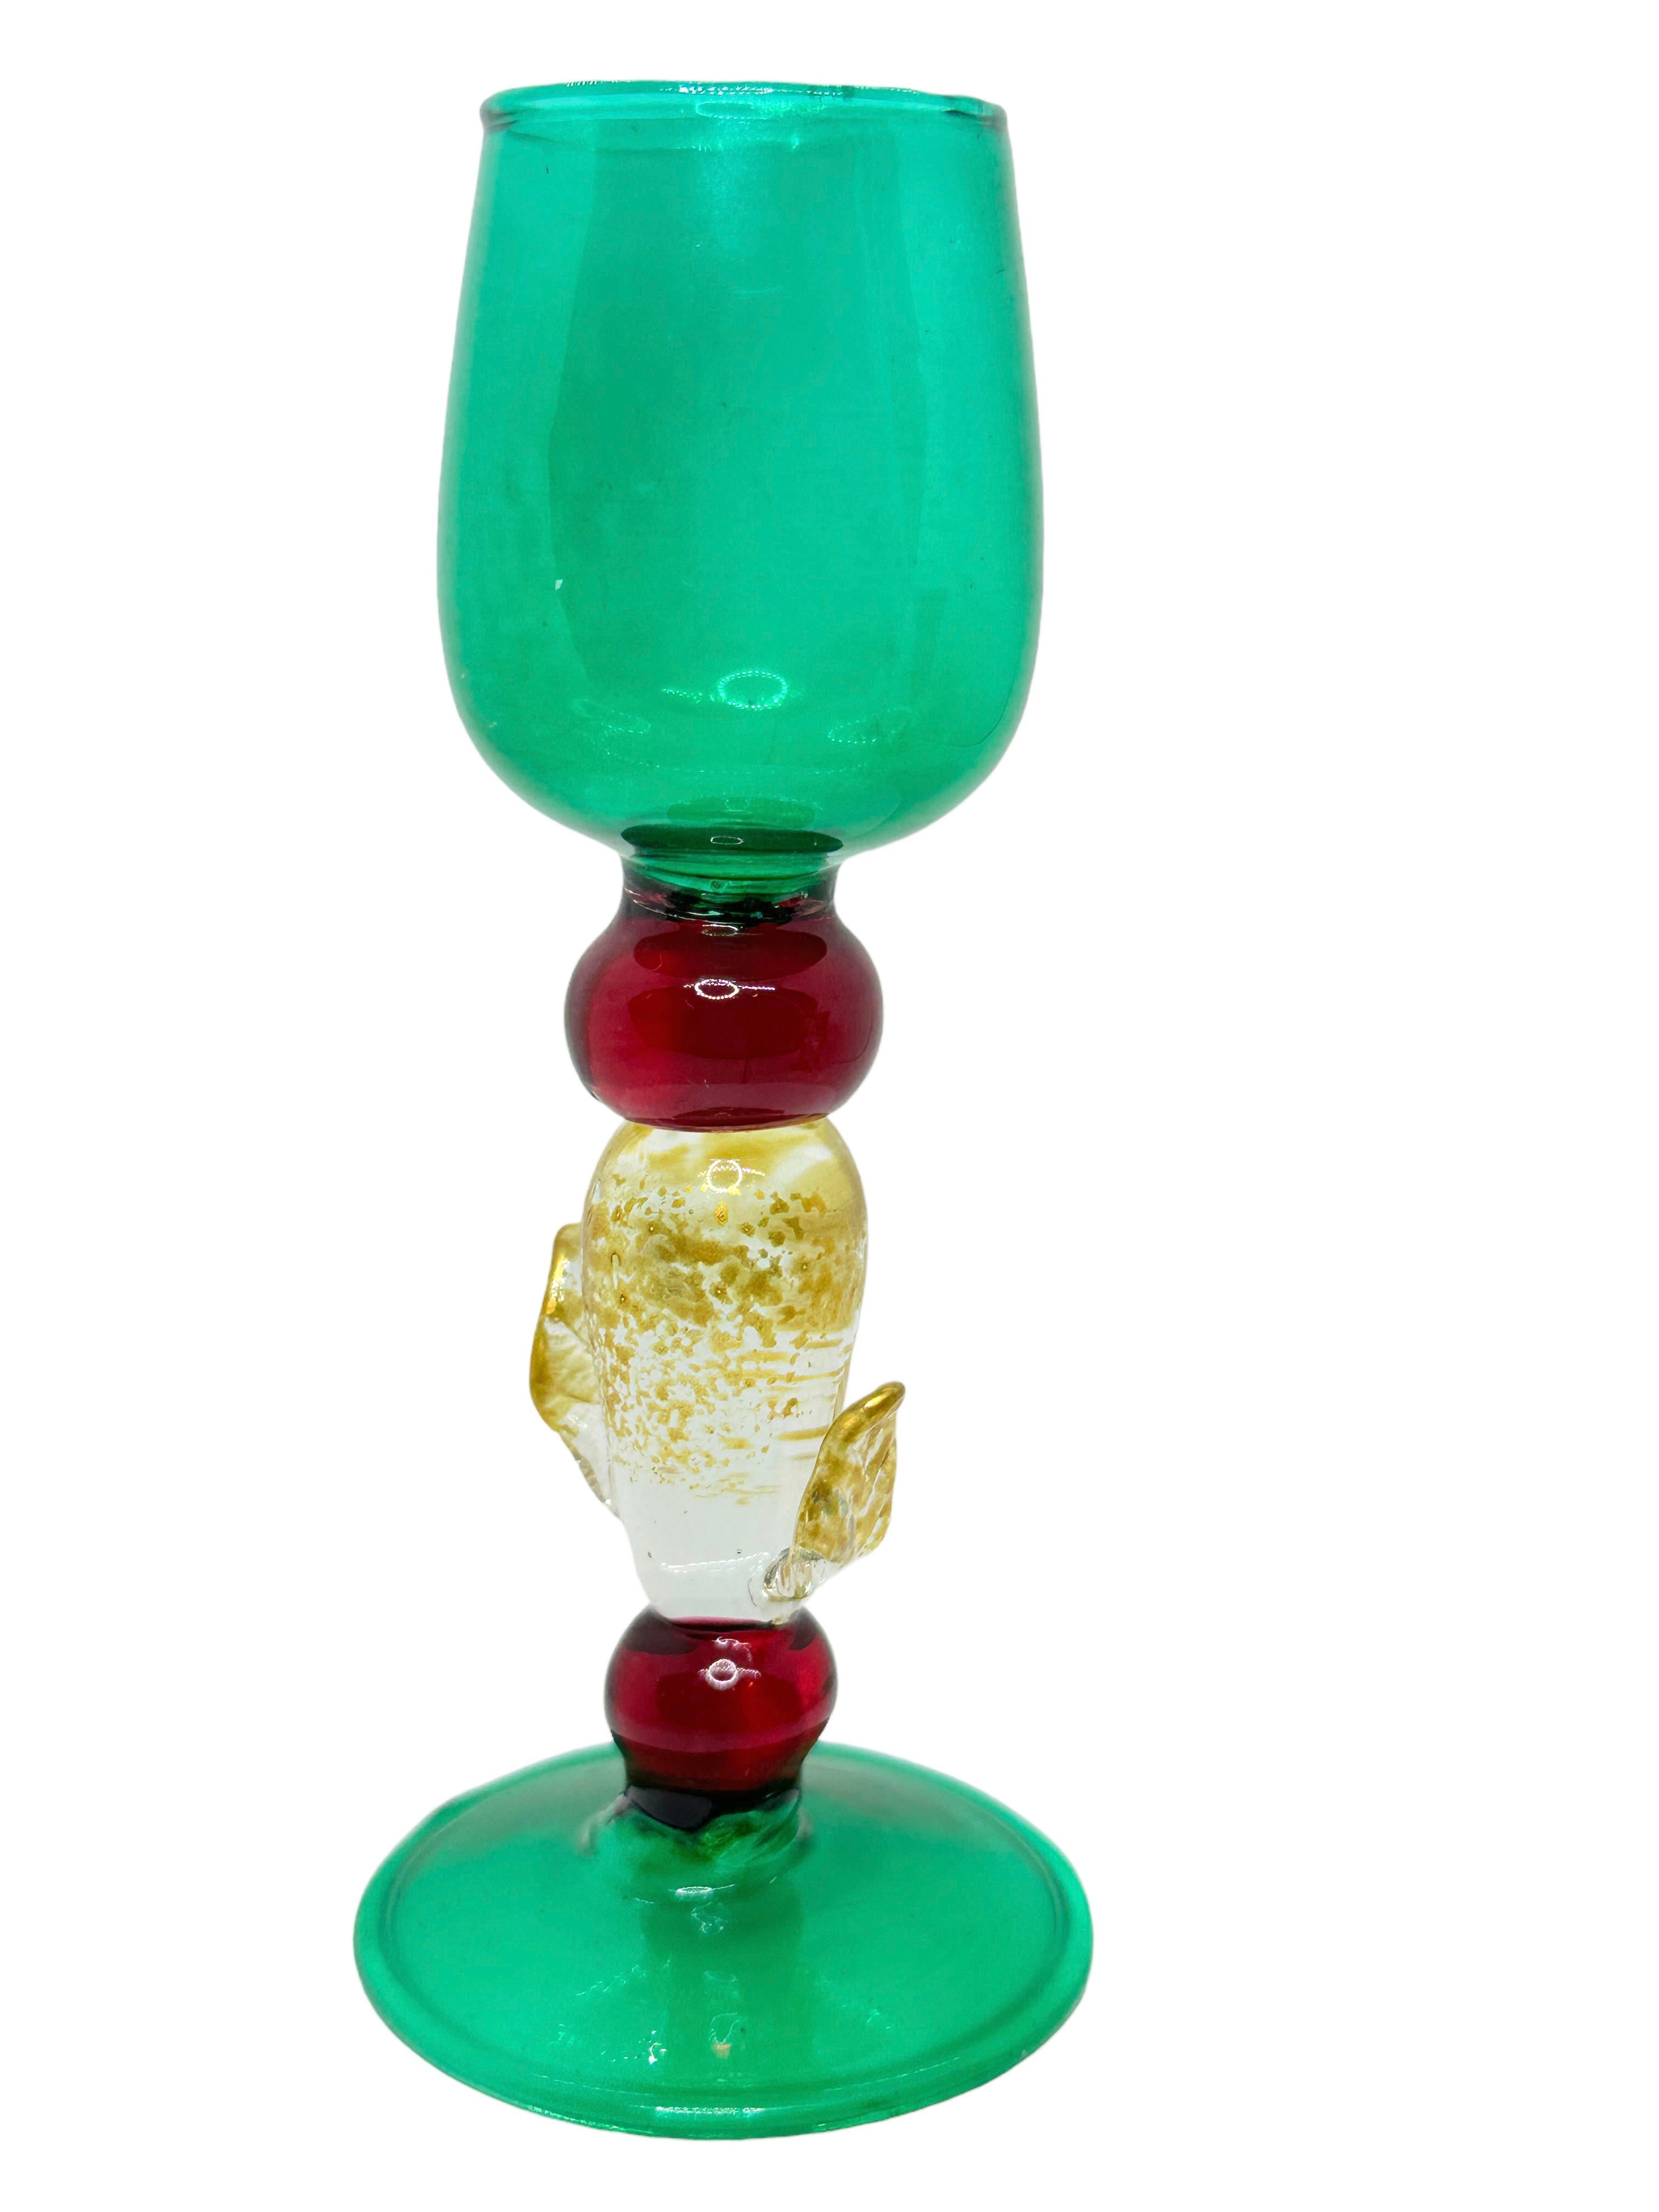 Renaissance Green Red Gold Stardust Salviati Murano Glass Liqueur Goblet, Vintage Italy  For Sale